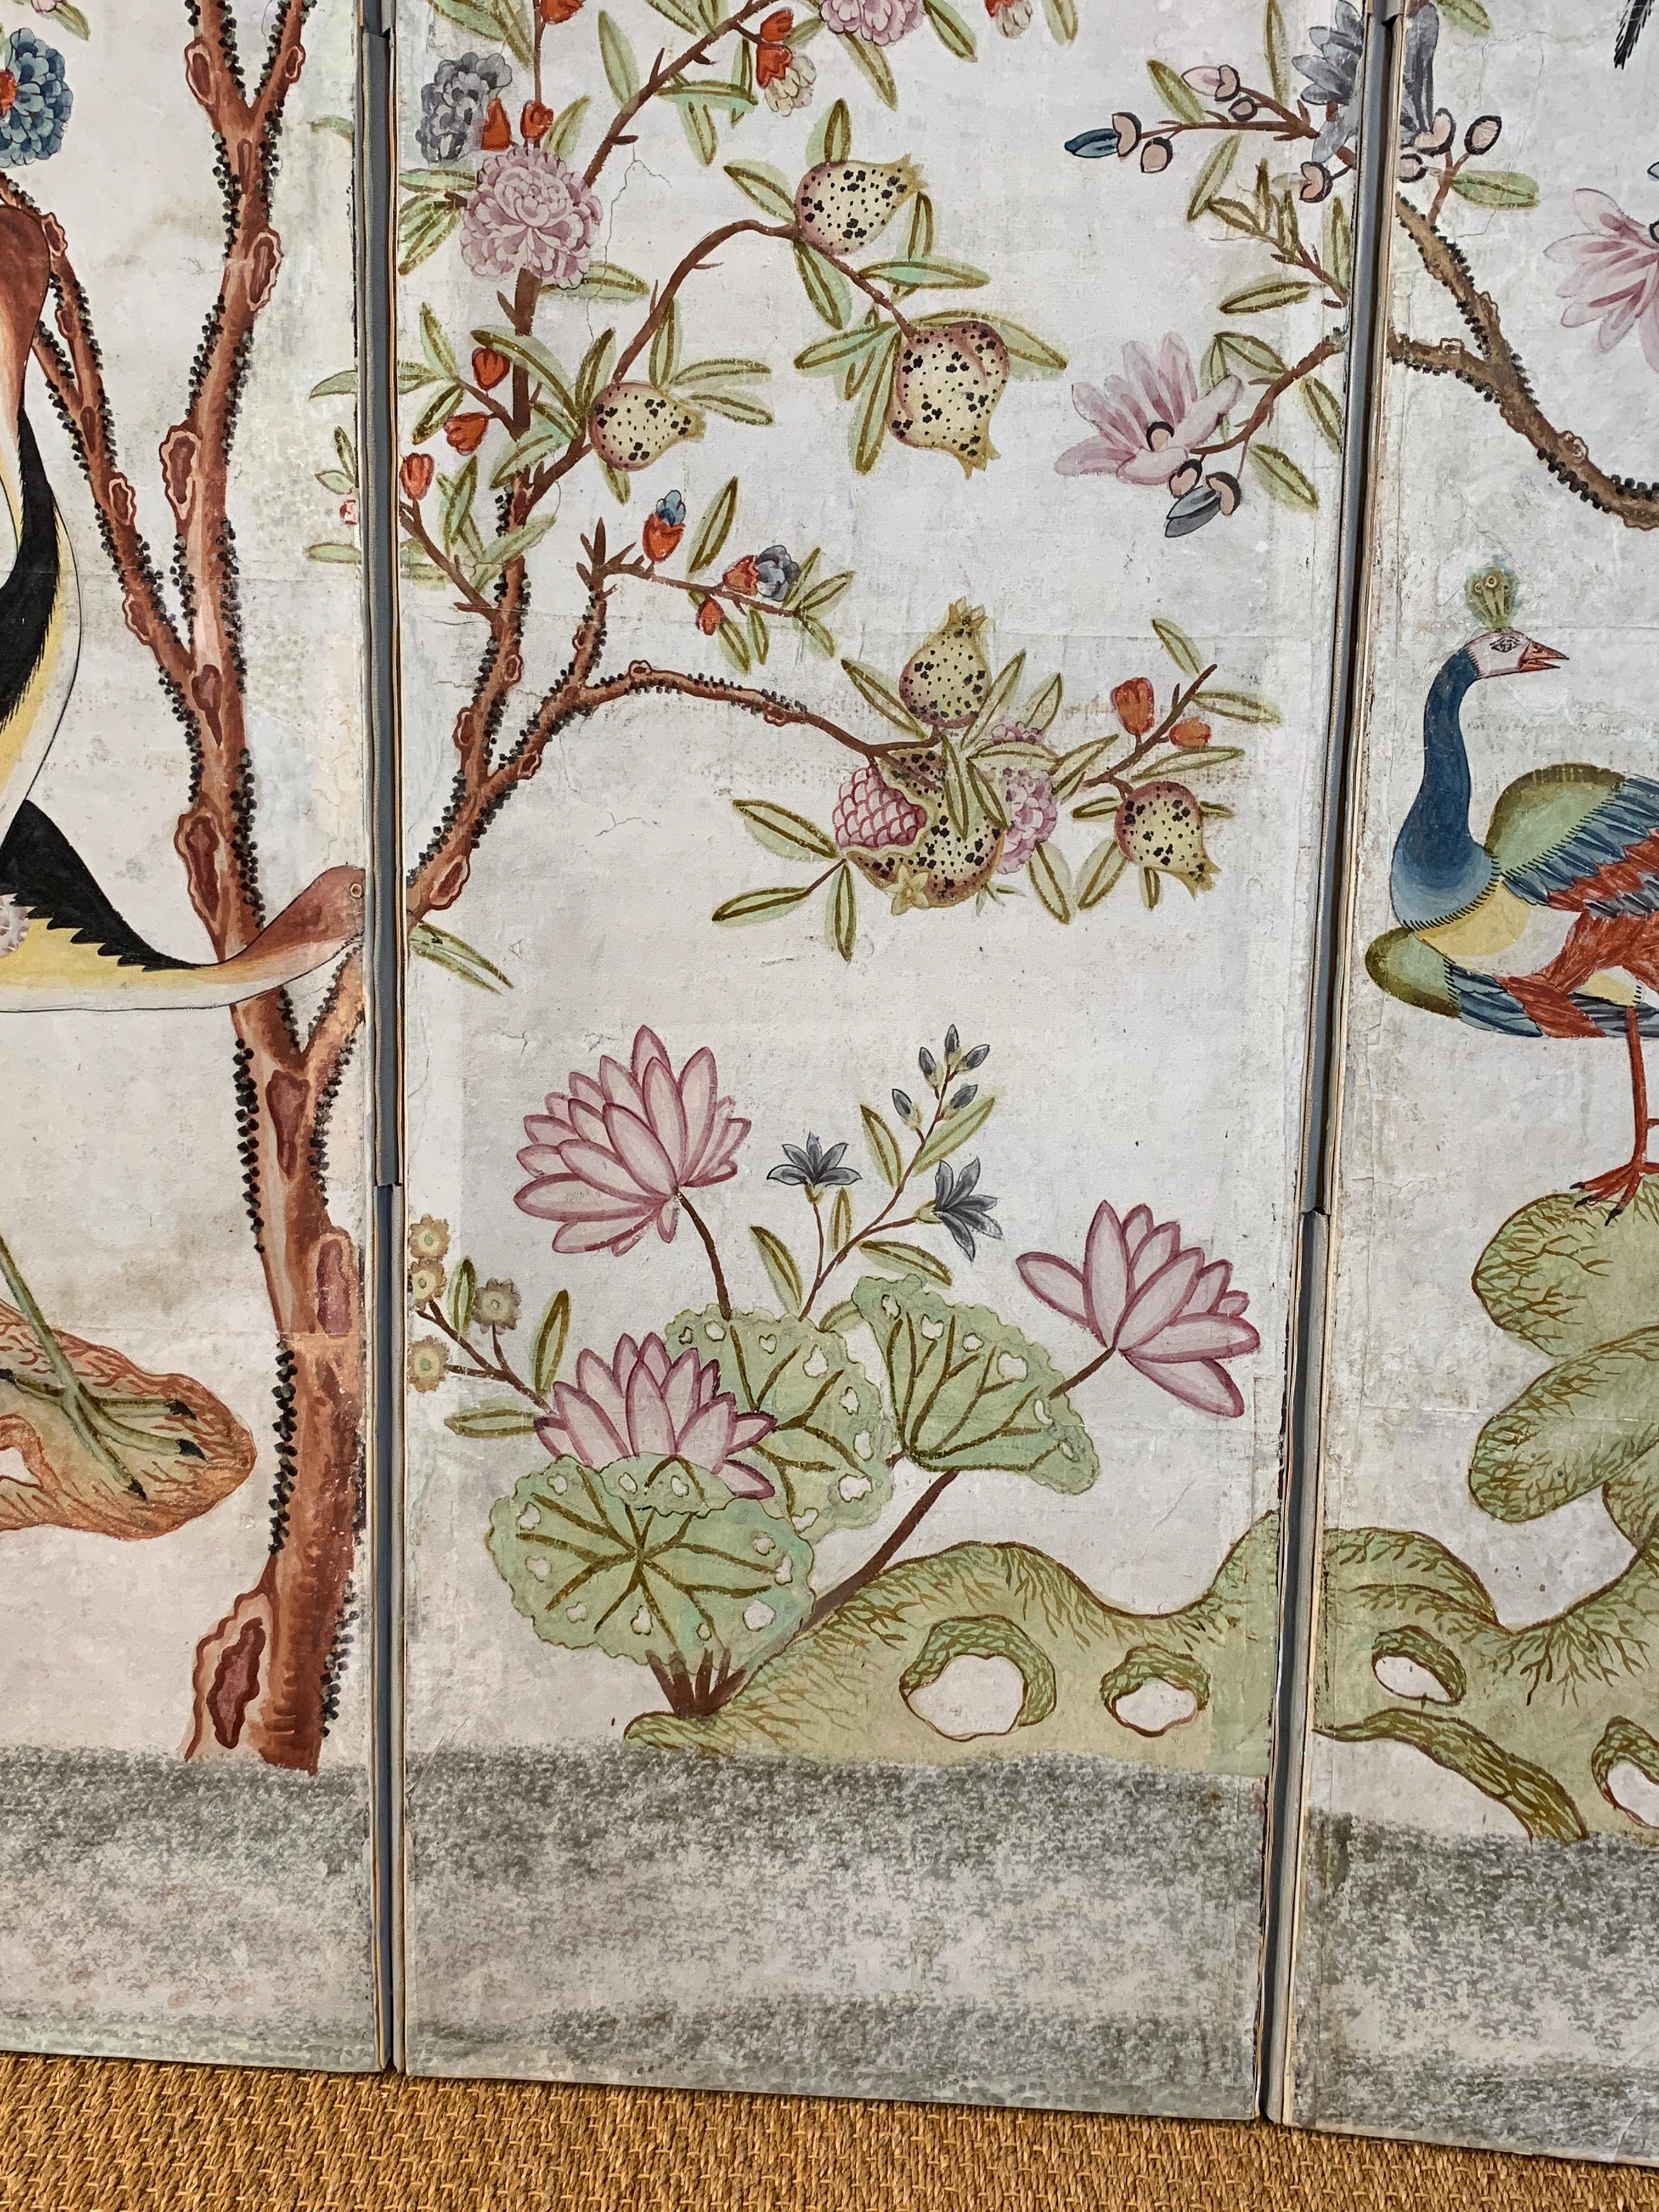 Hand Painted Four Panel Folding Screen in the Style of Gracie or de Gournay 2